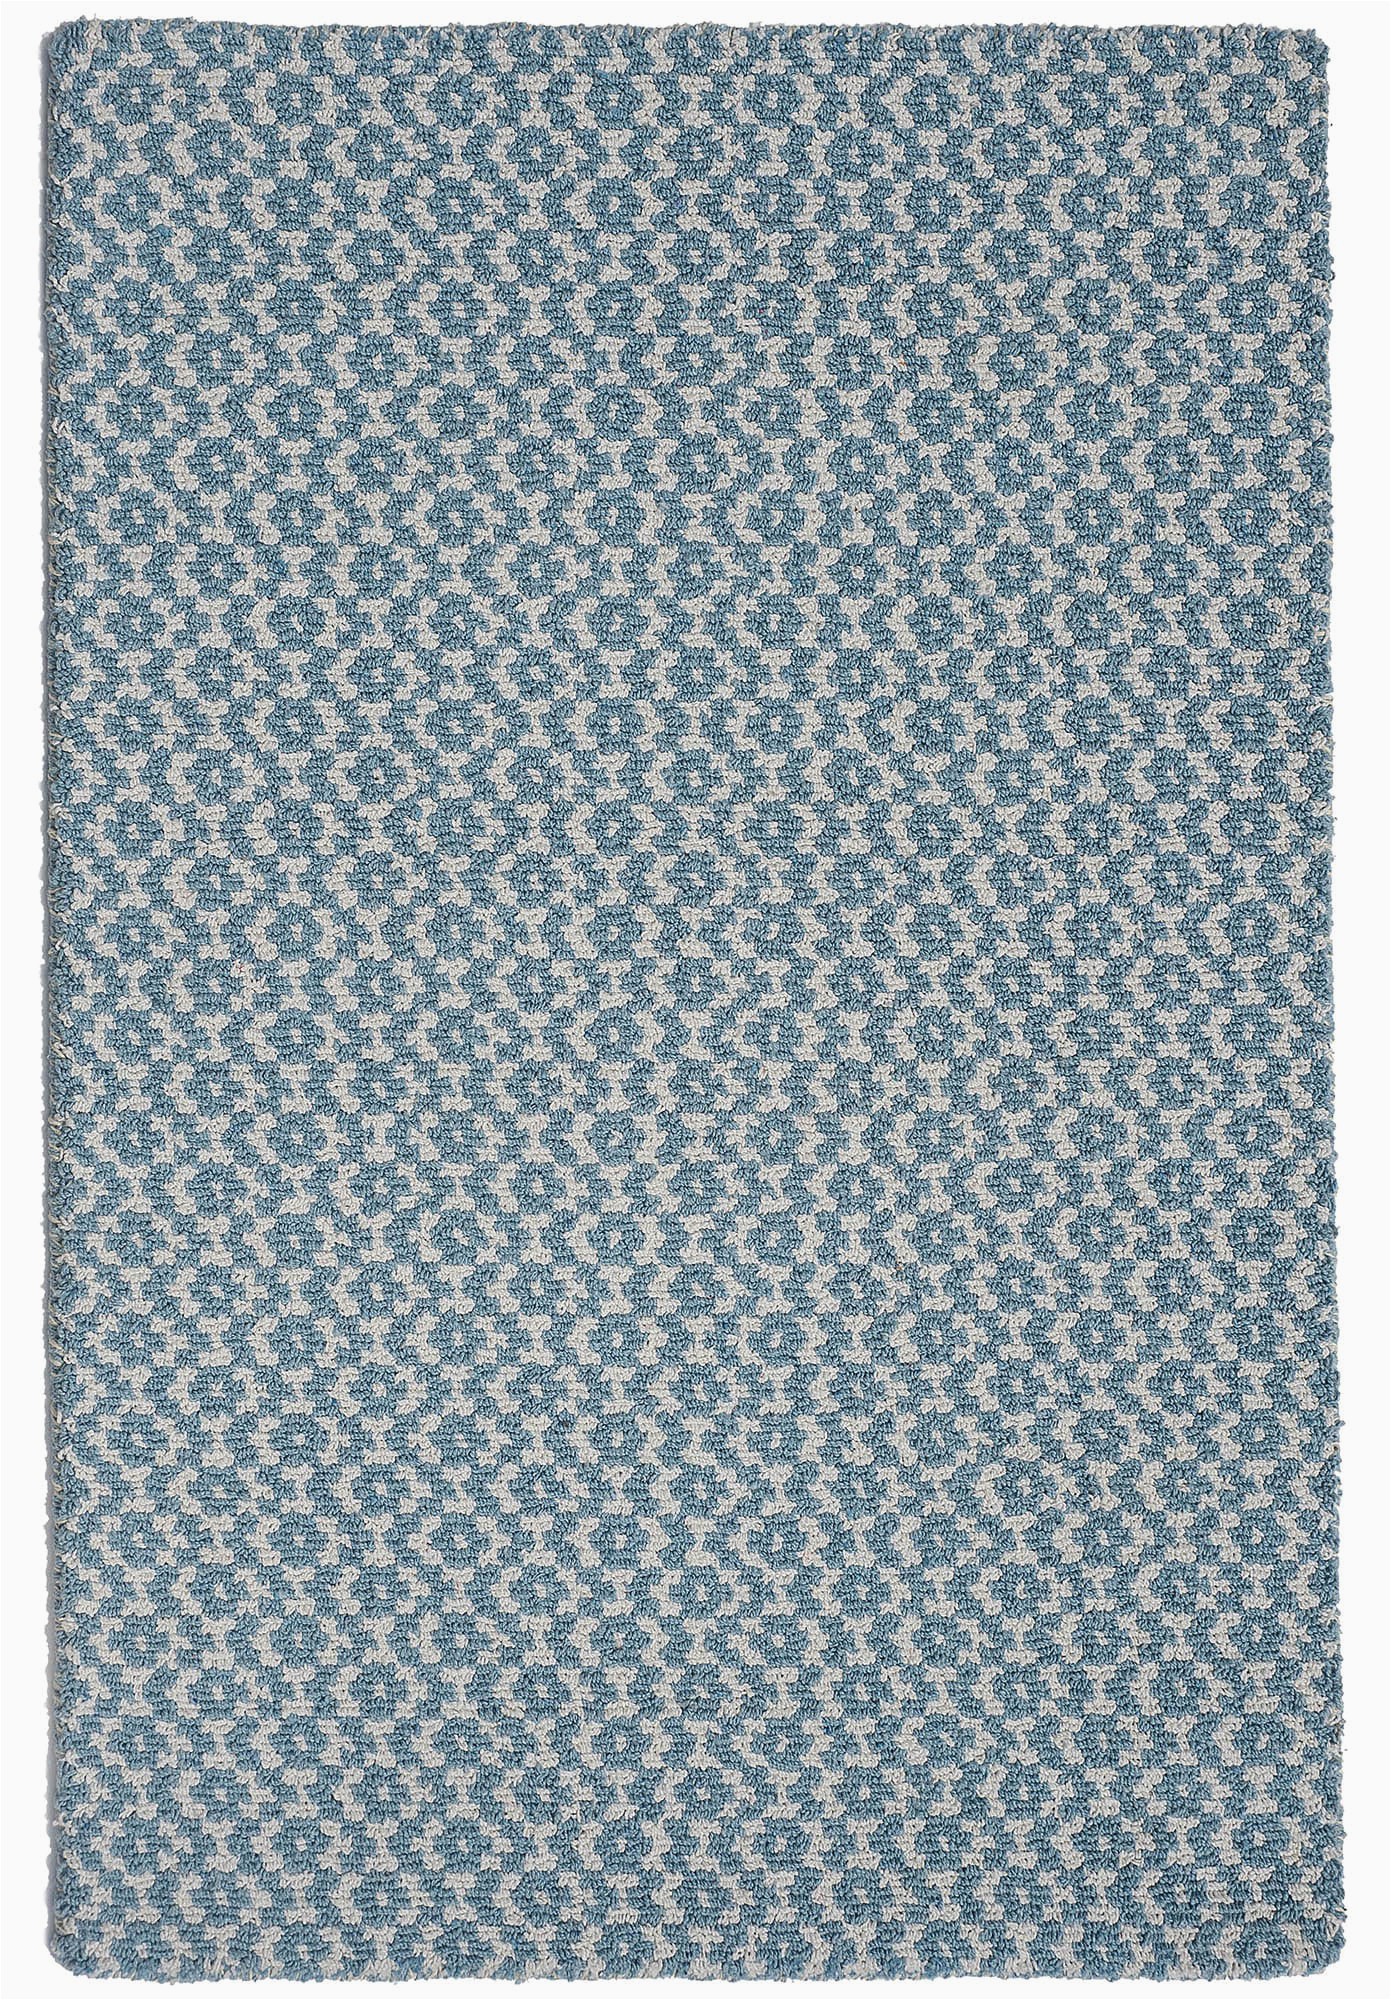 toulouse blue white eco cotton loom hooked rug 023